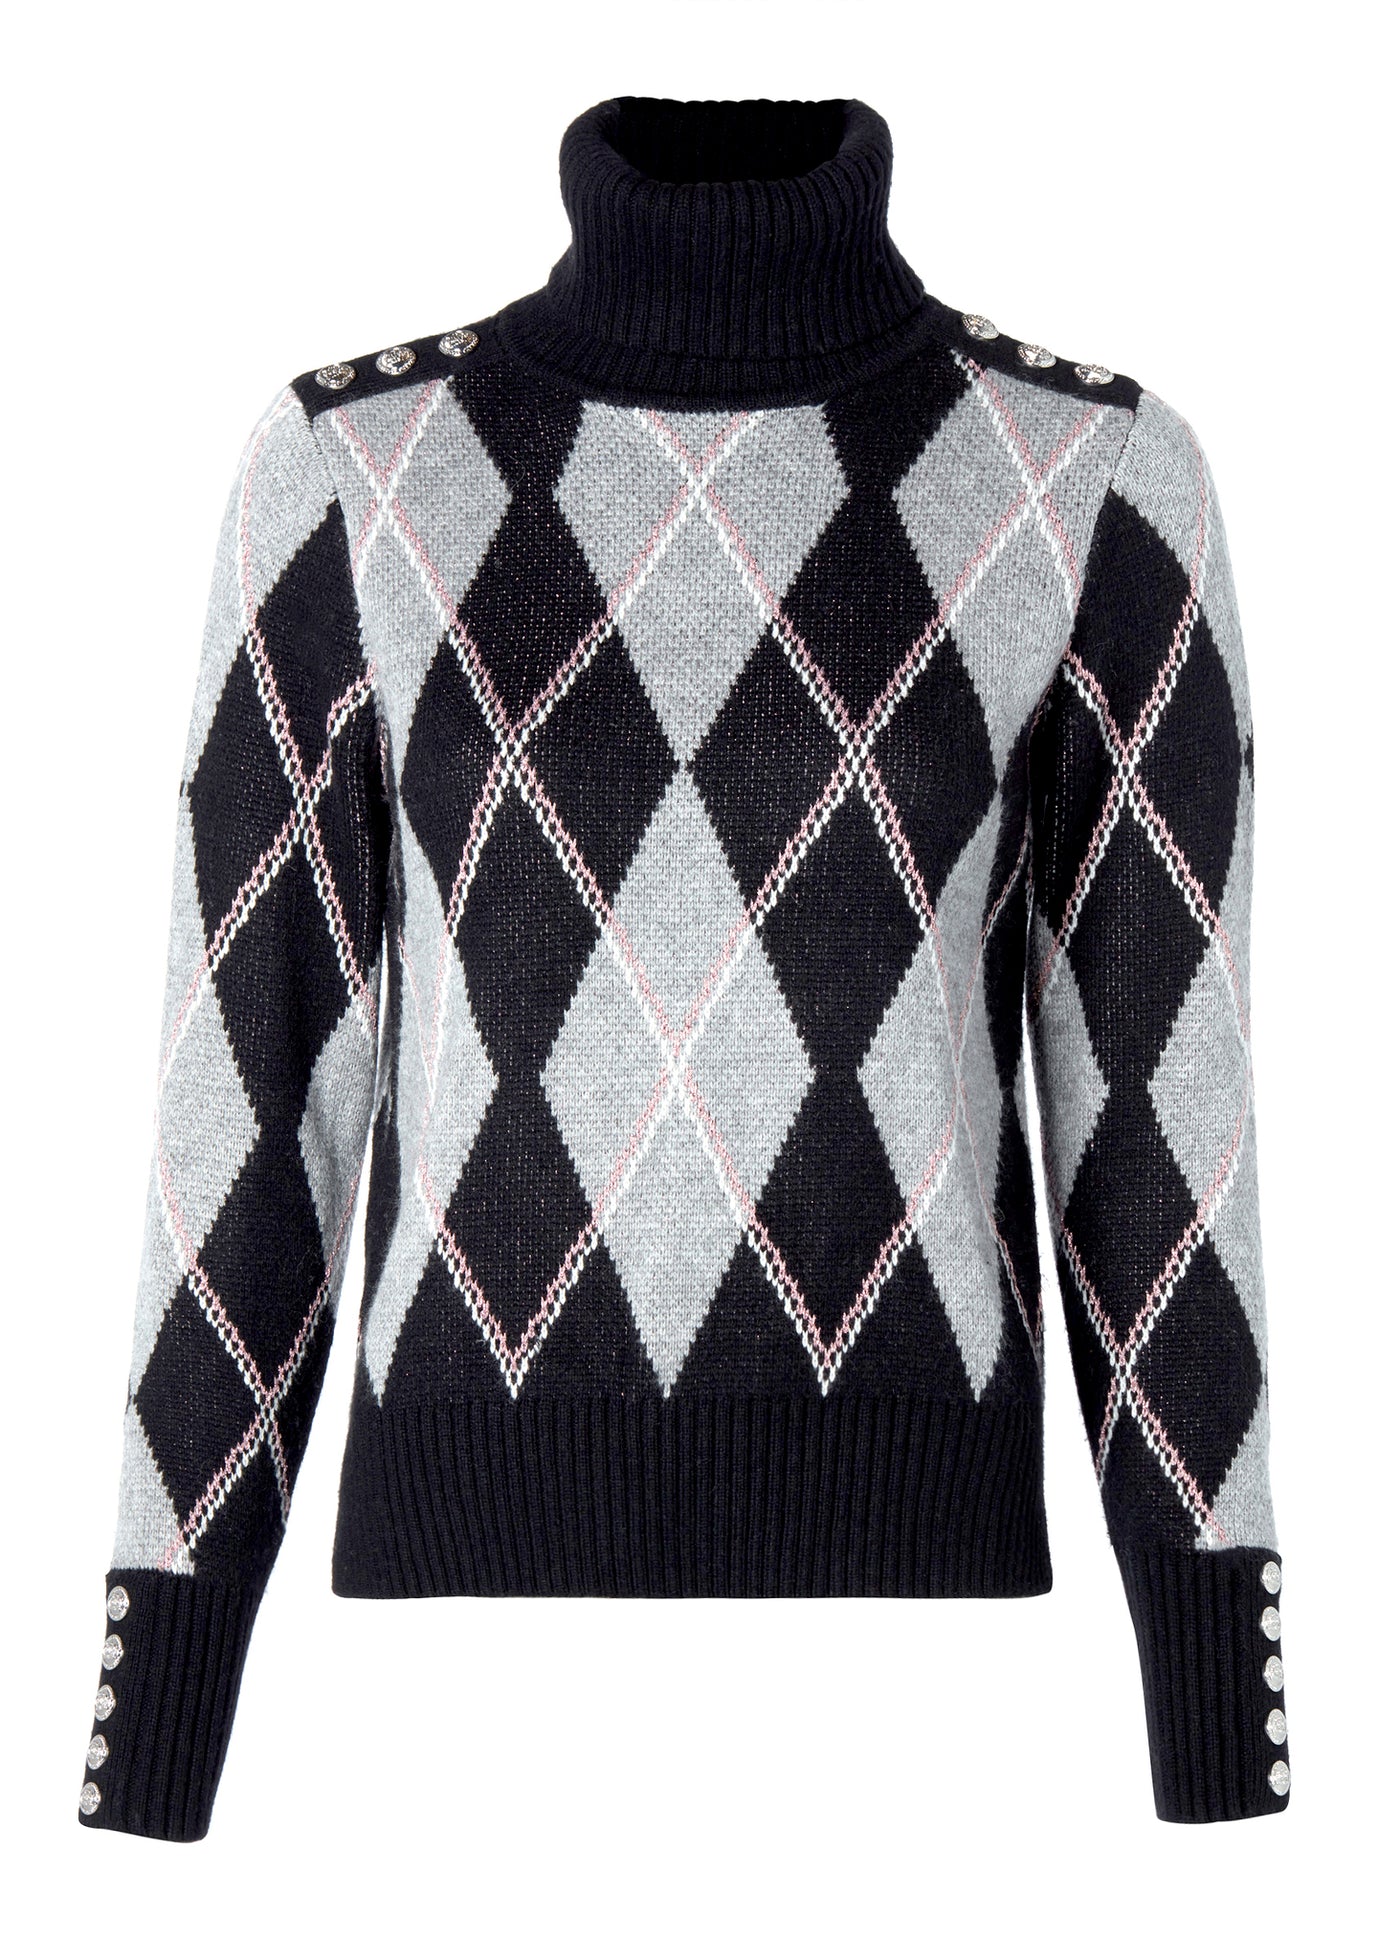 Holland Cooper Heritage Knit Jumper in Mono Pink